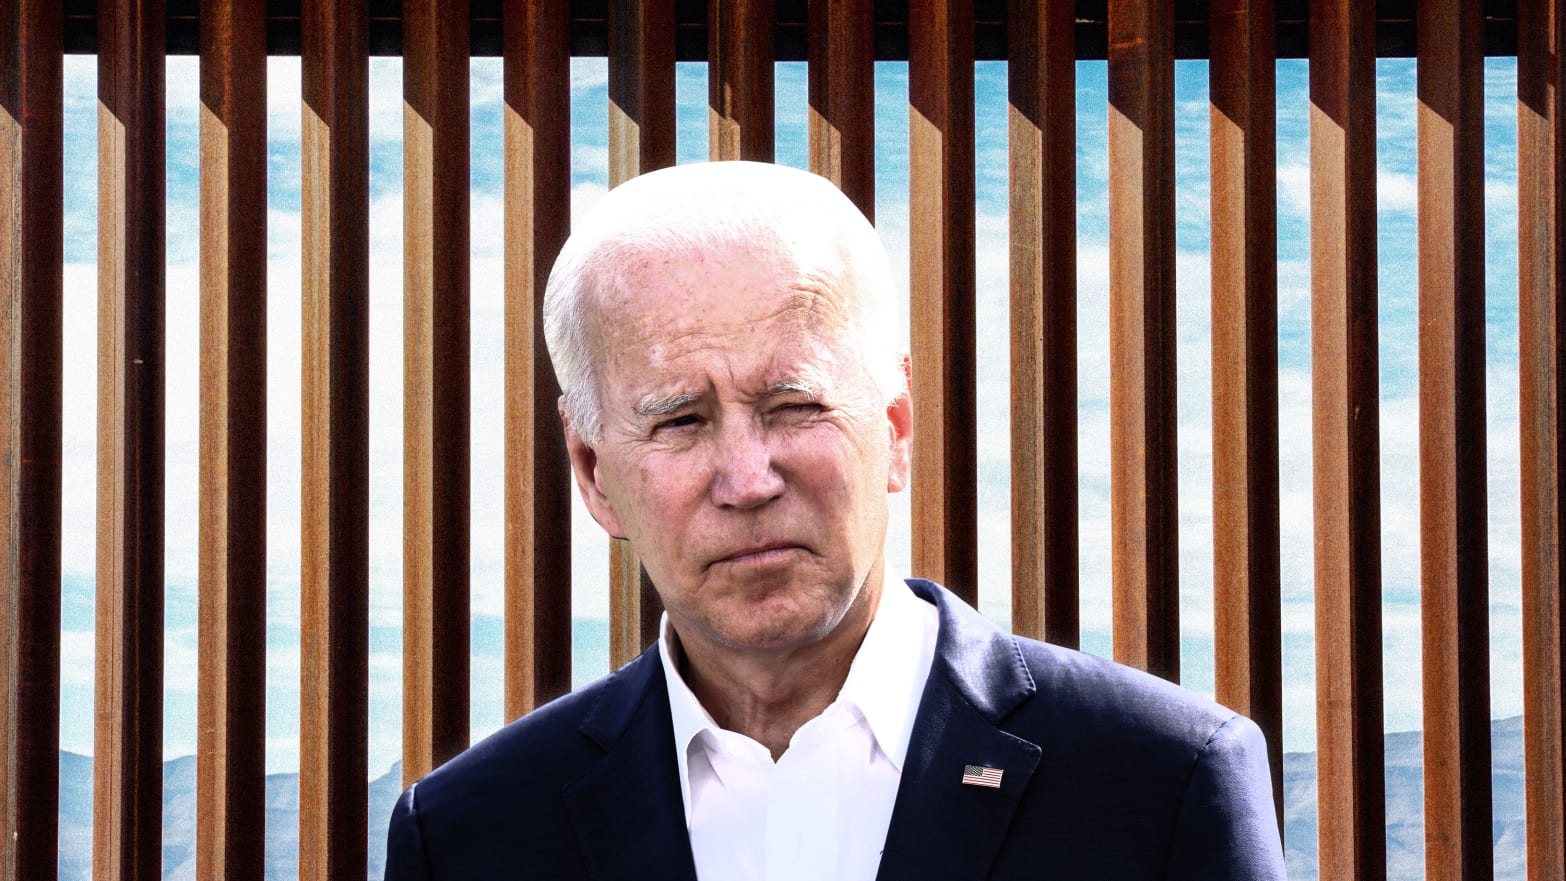 It’s Time for Joe Biden to Take Back Control of the Texas Border